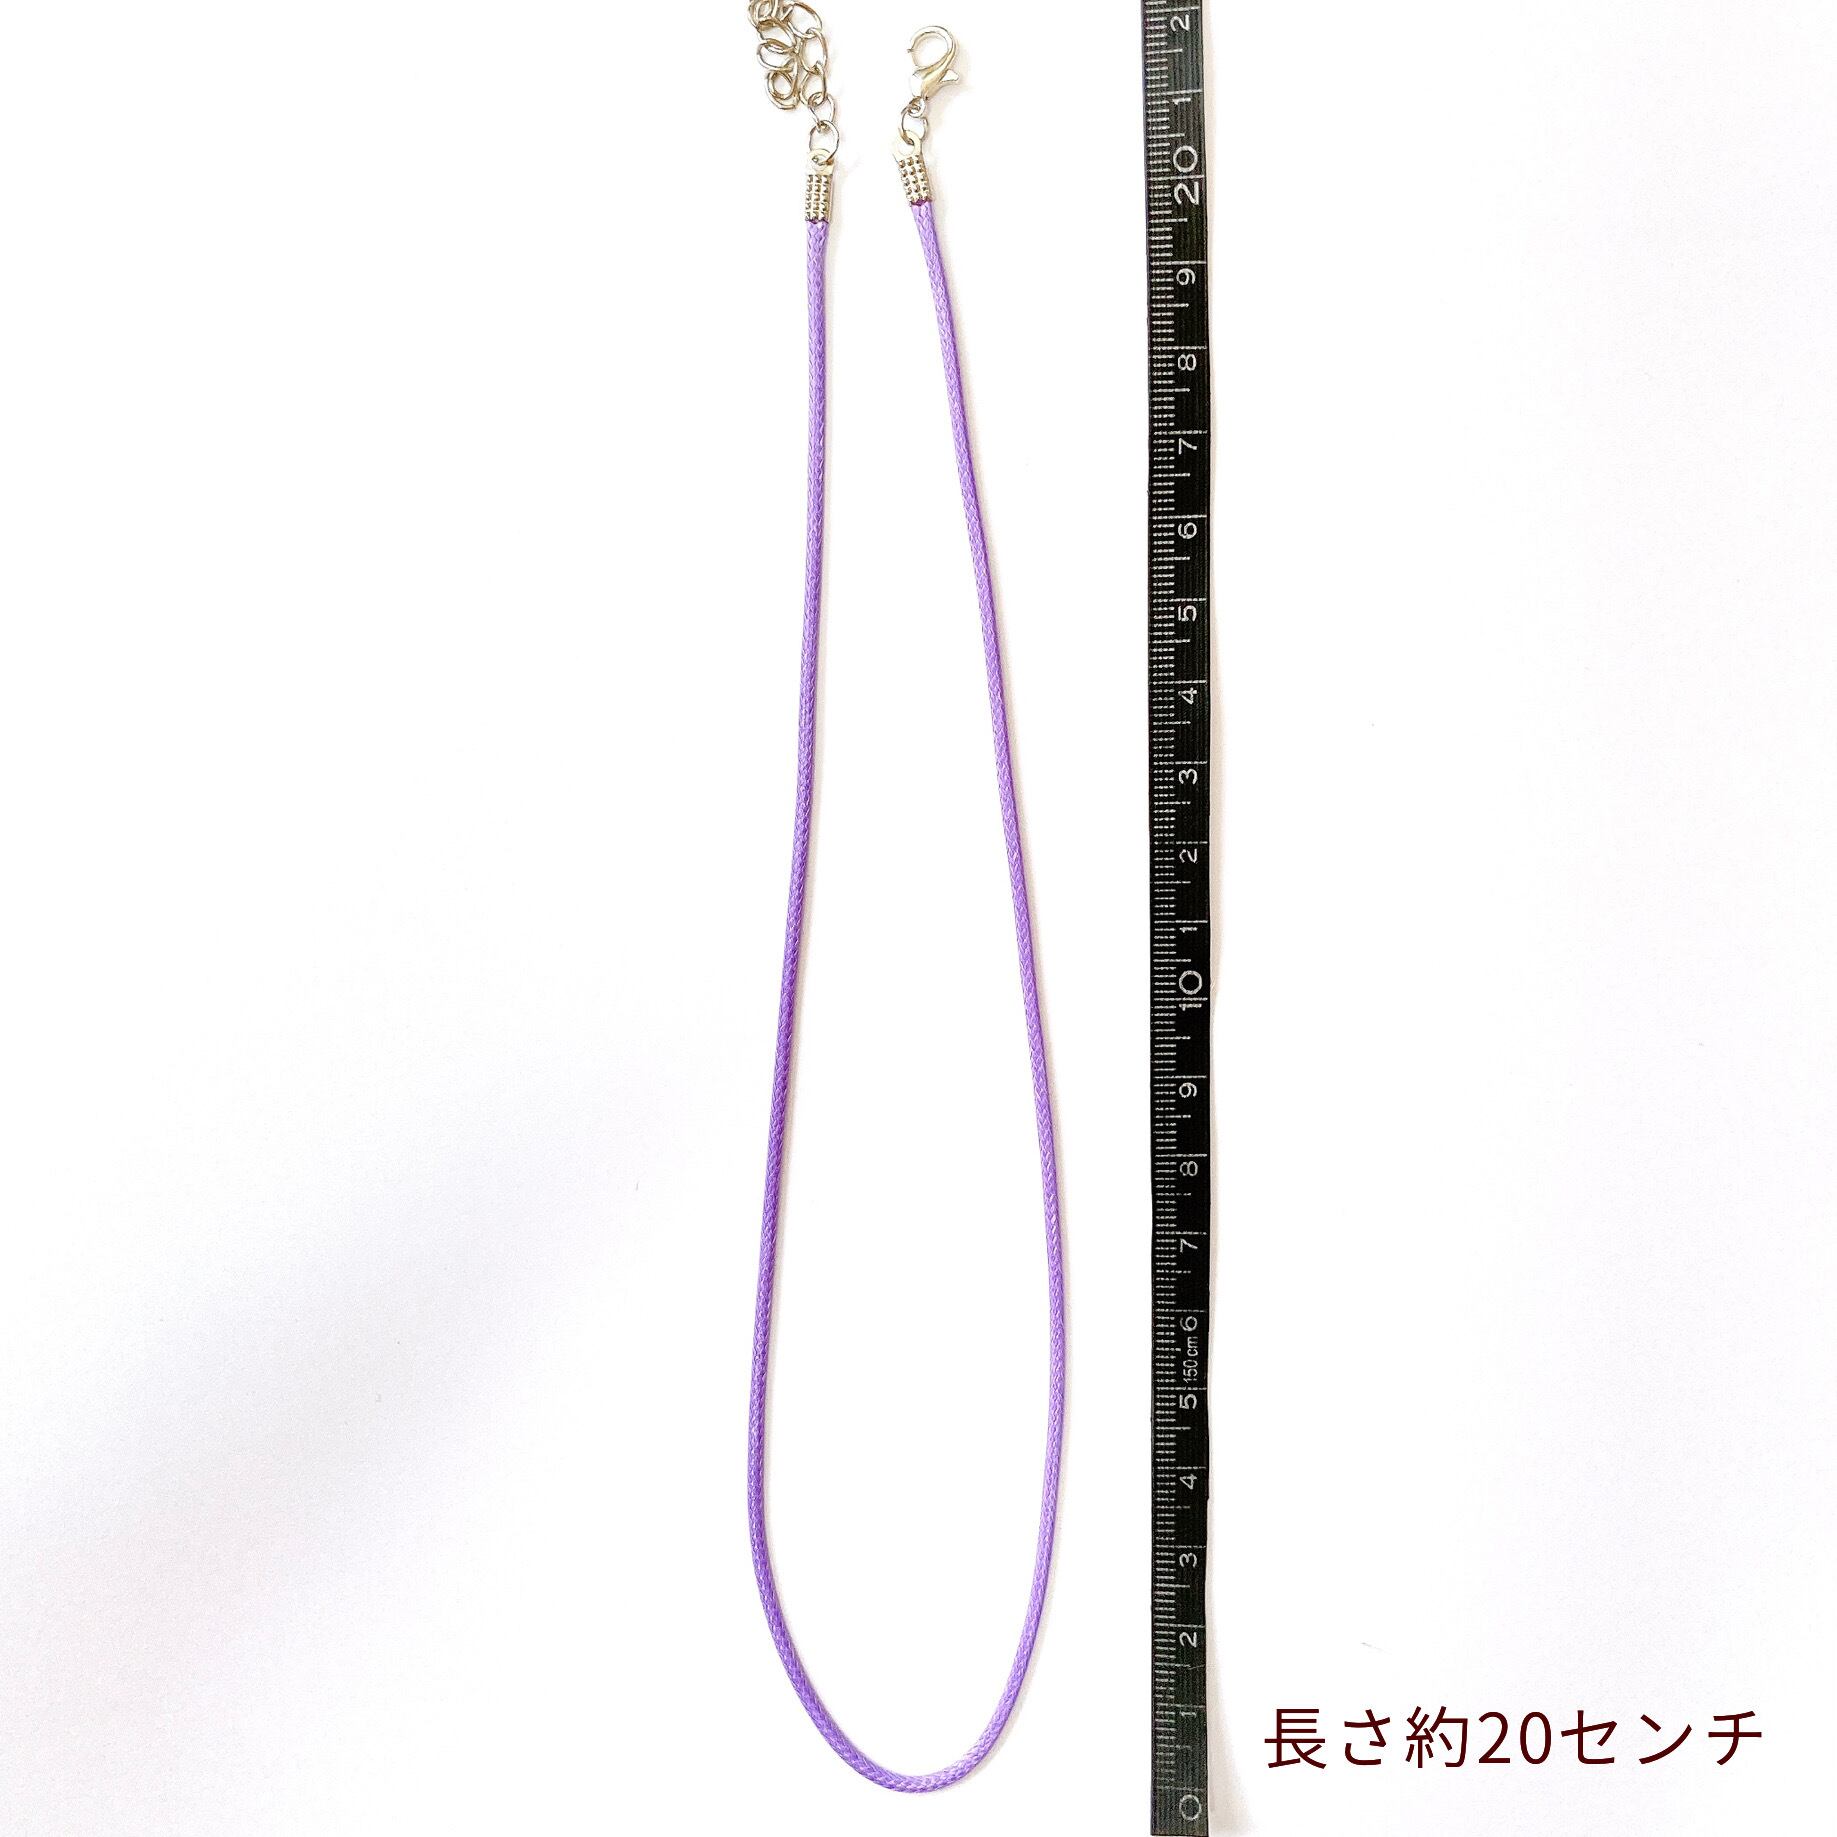 little   necklace  （ m - 2 ）  キッズネックレス